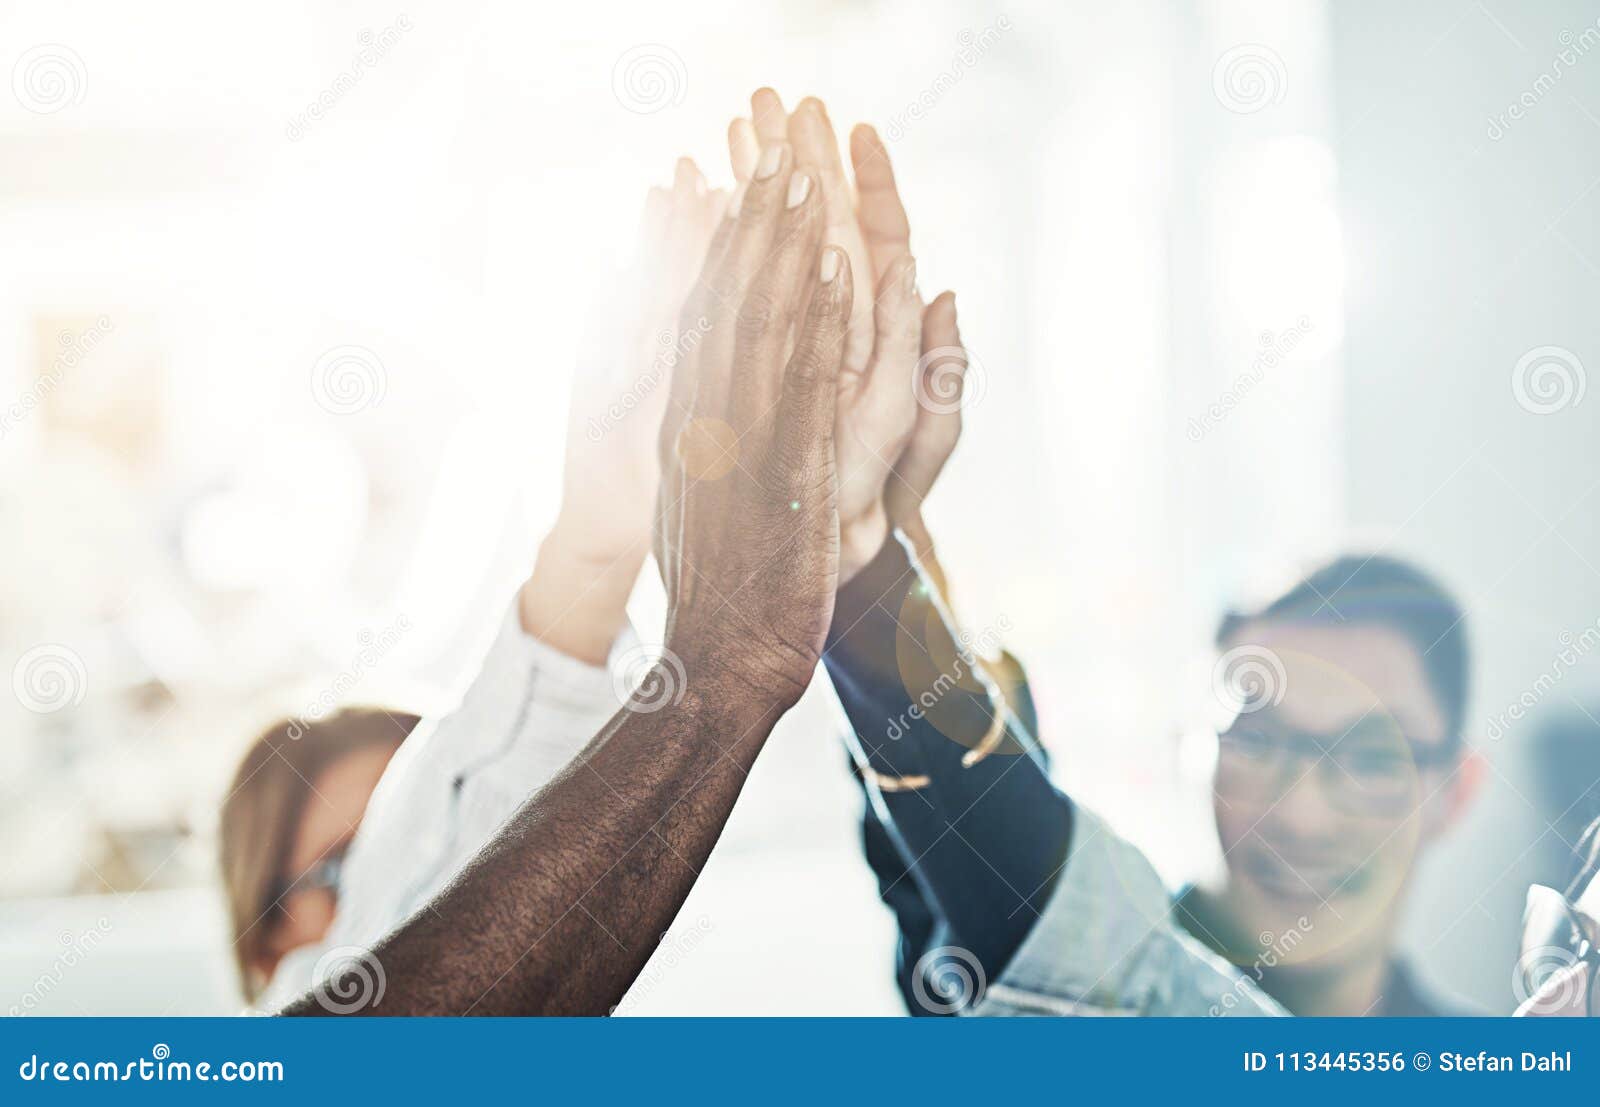 diverse team of businesspeople high fiving together in an office